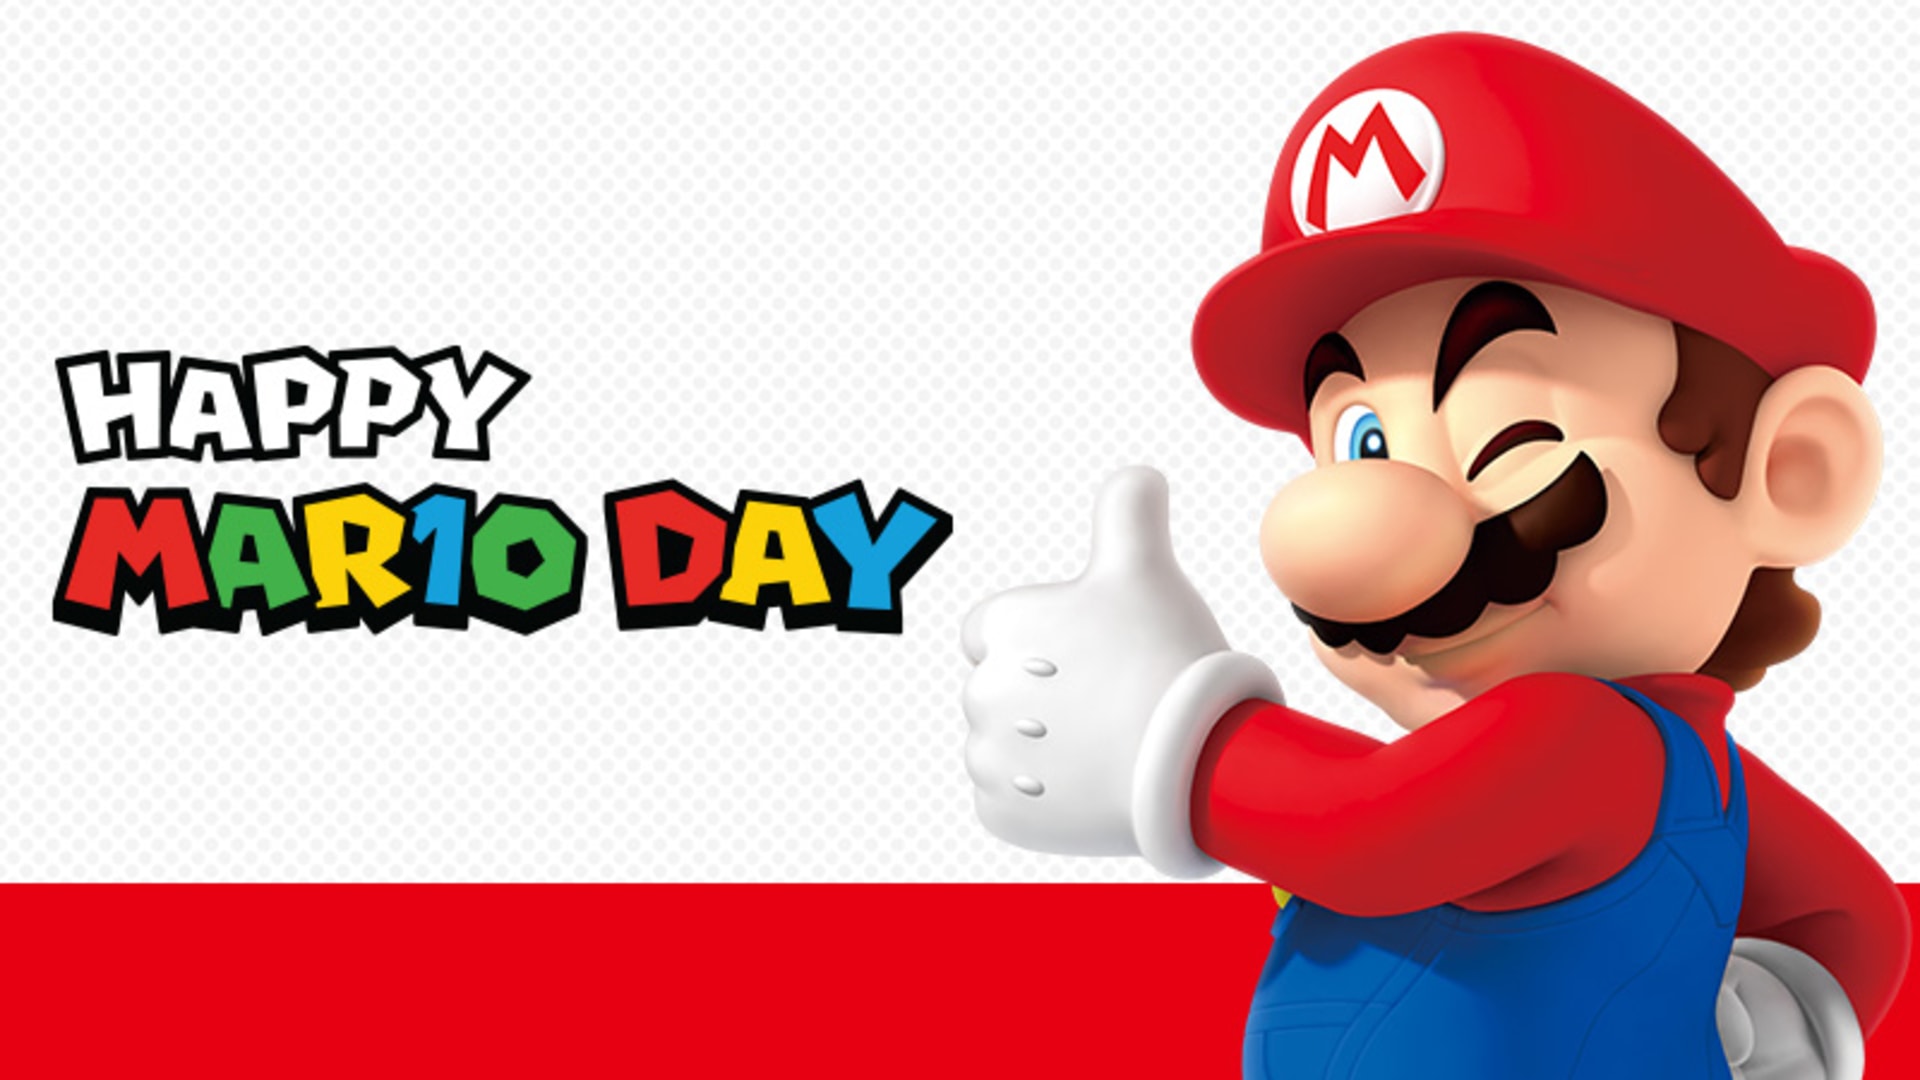 Happy MAR10 Day Have fun with this stache of Mario games Nintendo